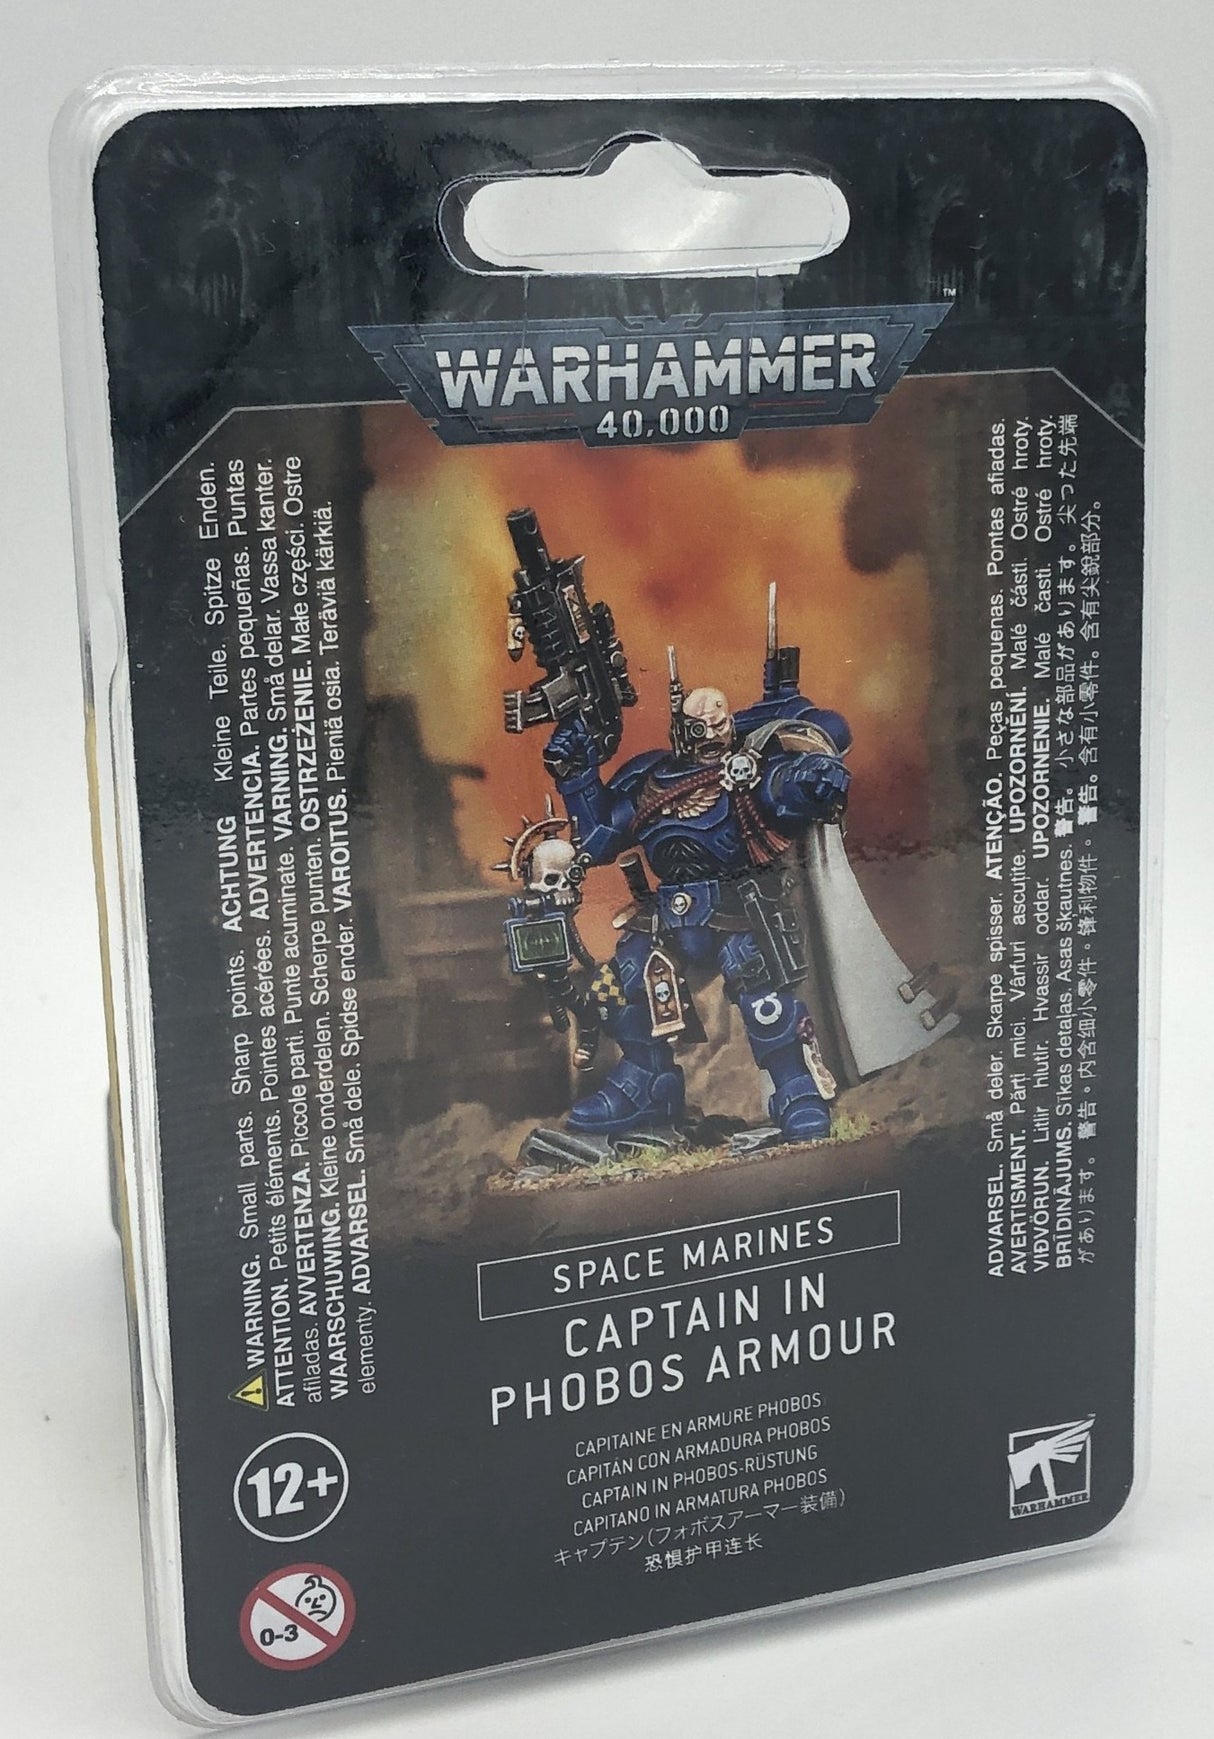 Space Marines: Captain In Phobos Armour